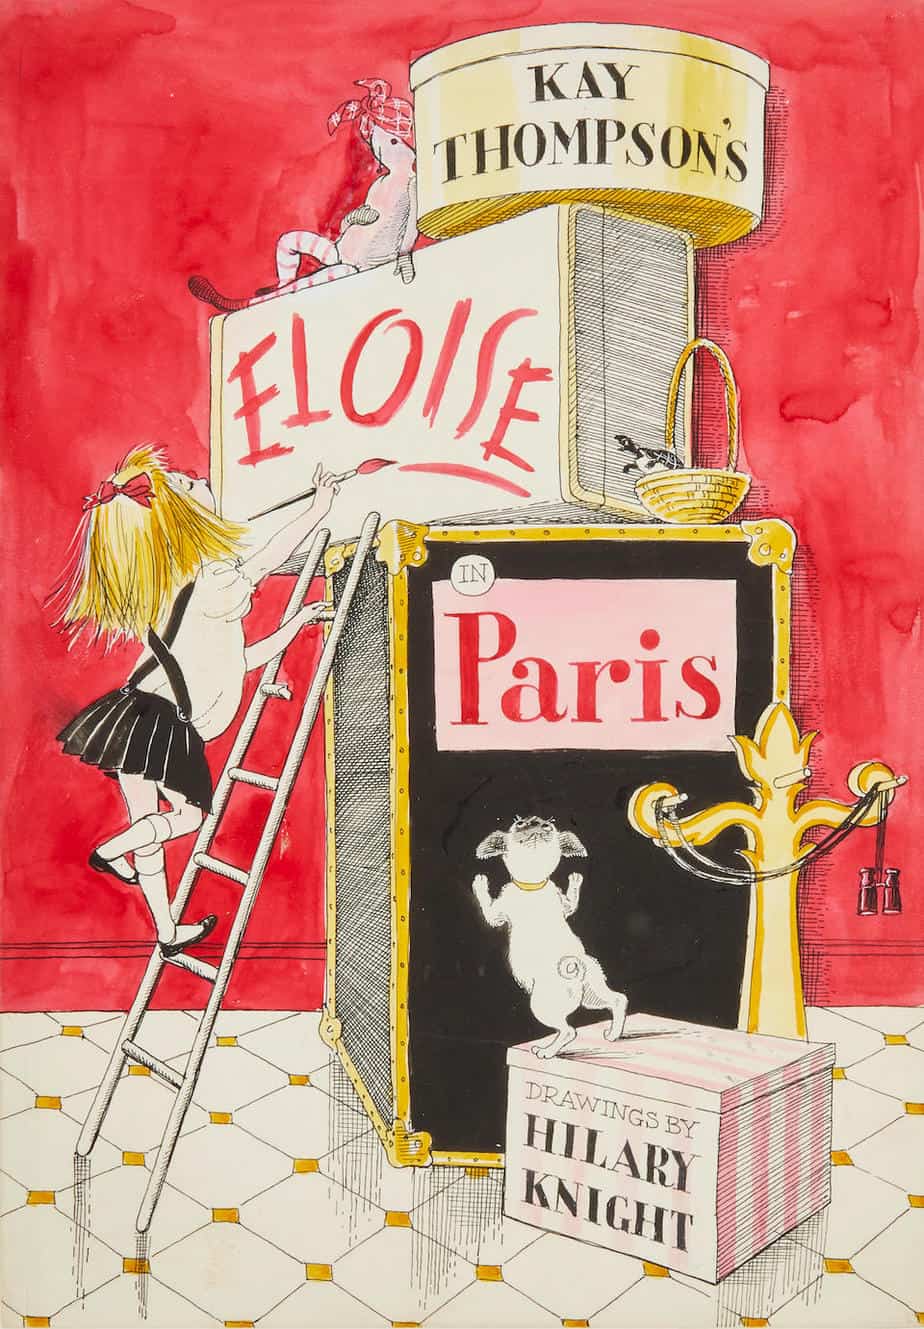 Eloise in Paris by Kay Thompson and Hilary Knight